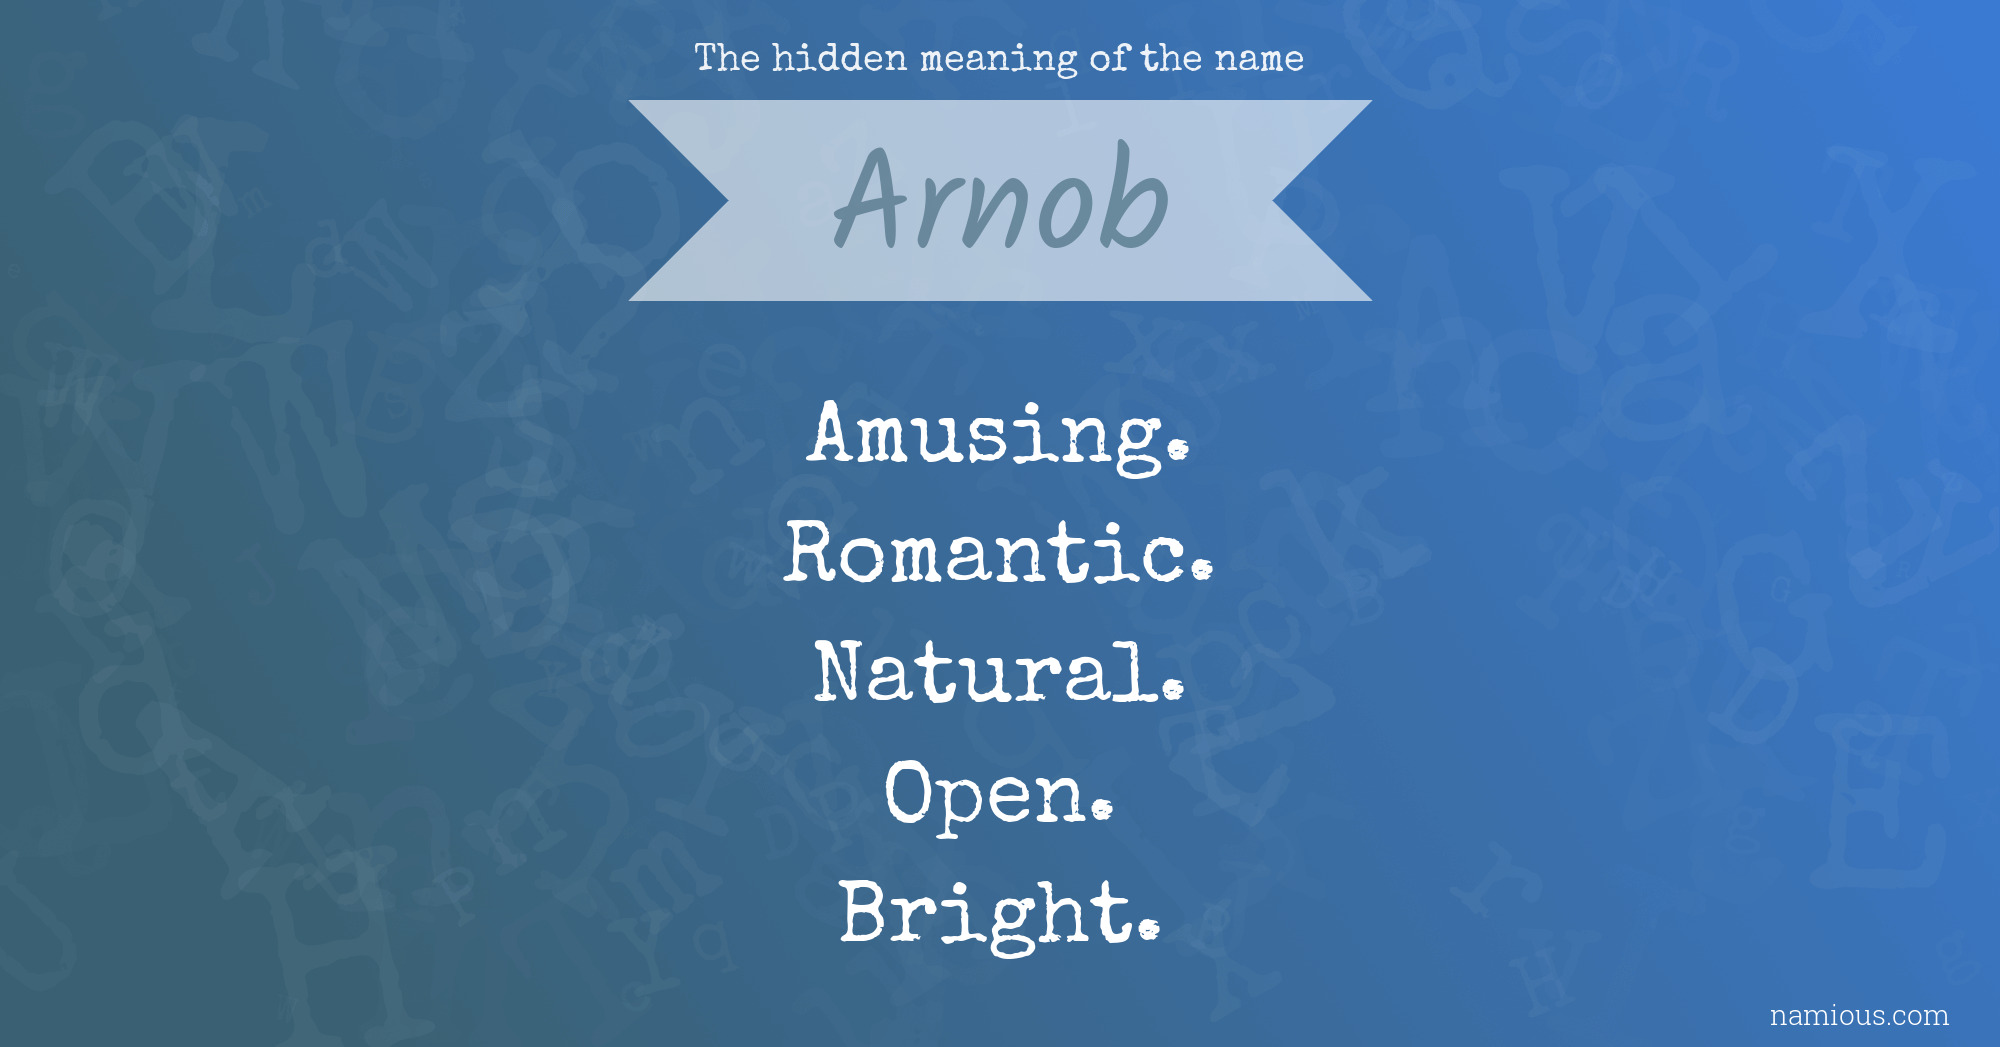 The hidden meaning of the name Arnob